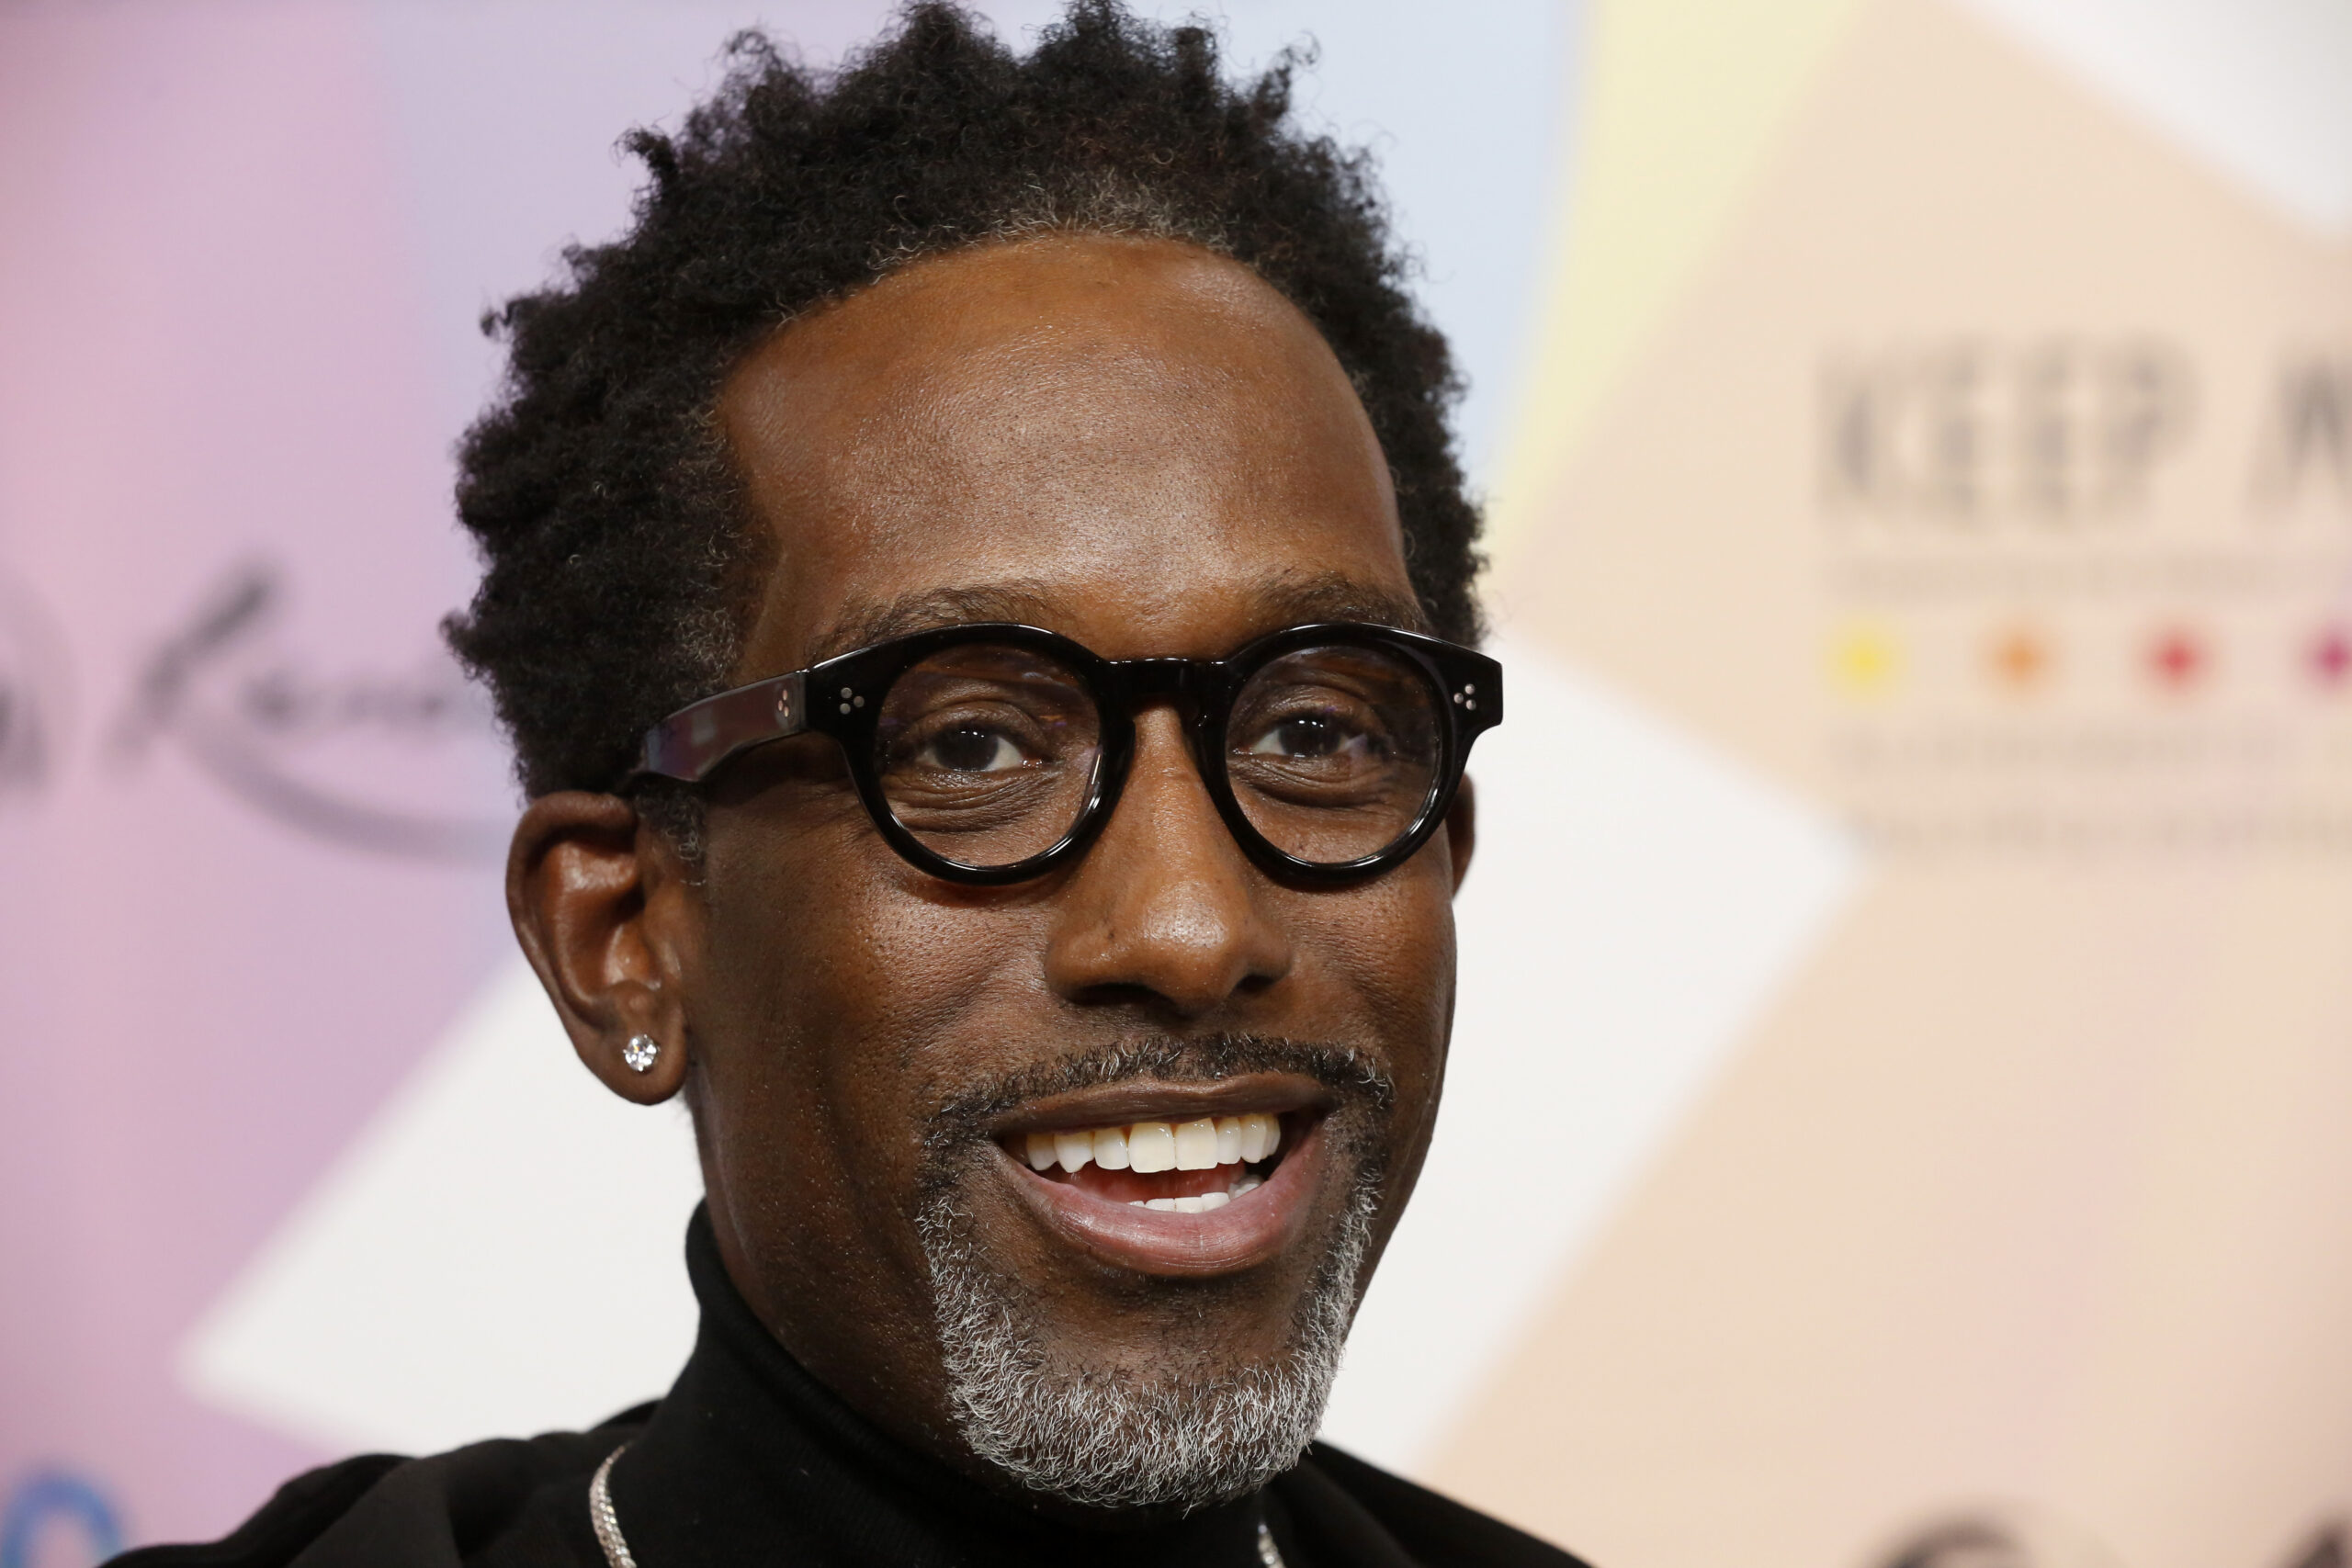 Boyz II Men's Shawn Stockman Says 'R&B Has Lost Their Identity,' Blames Labels for Supporting 'Thug Images' of Black Men